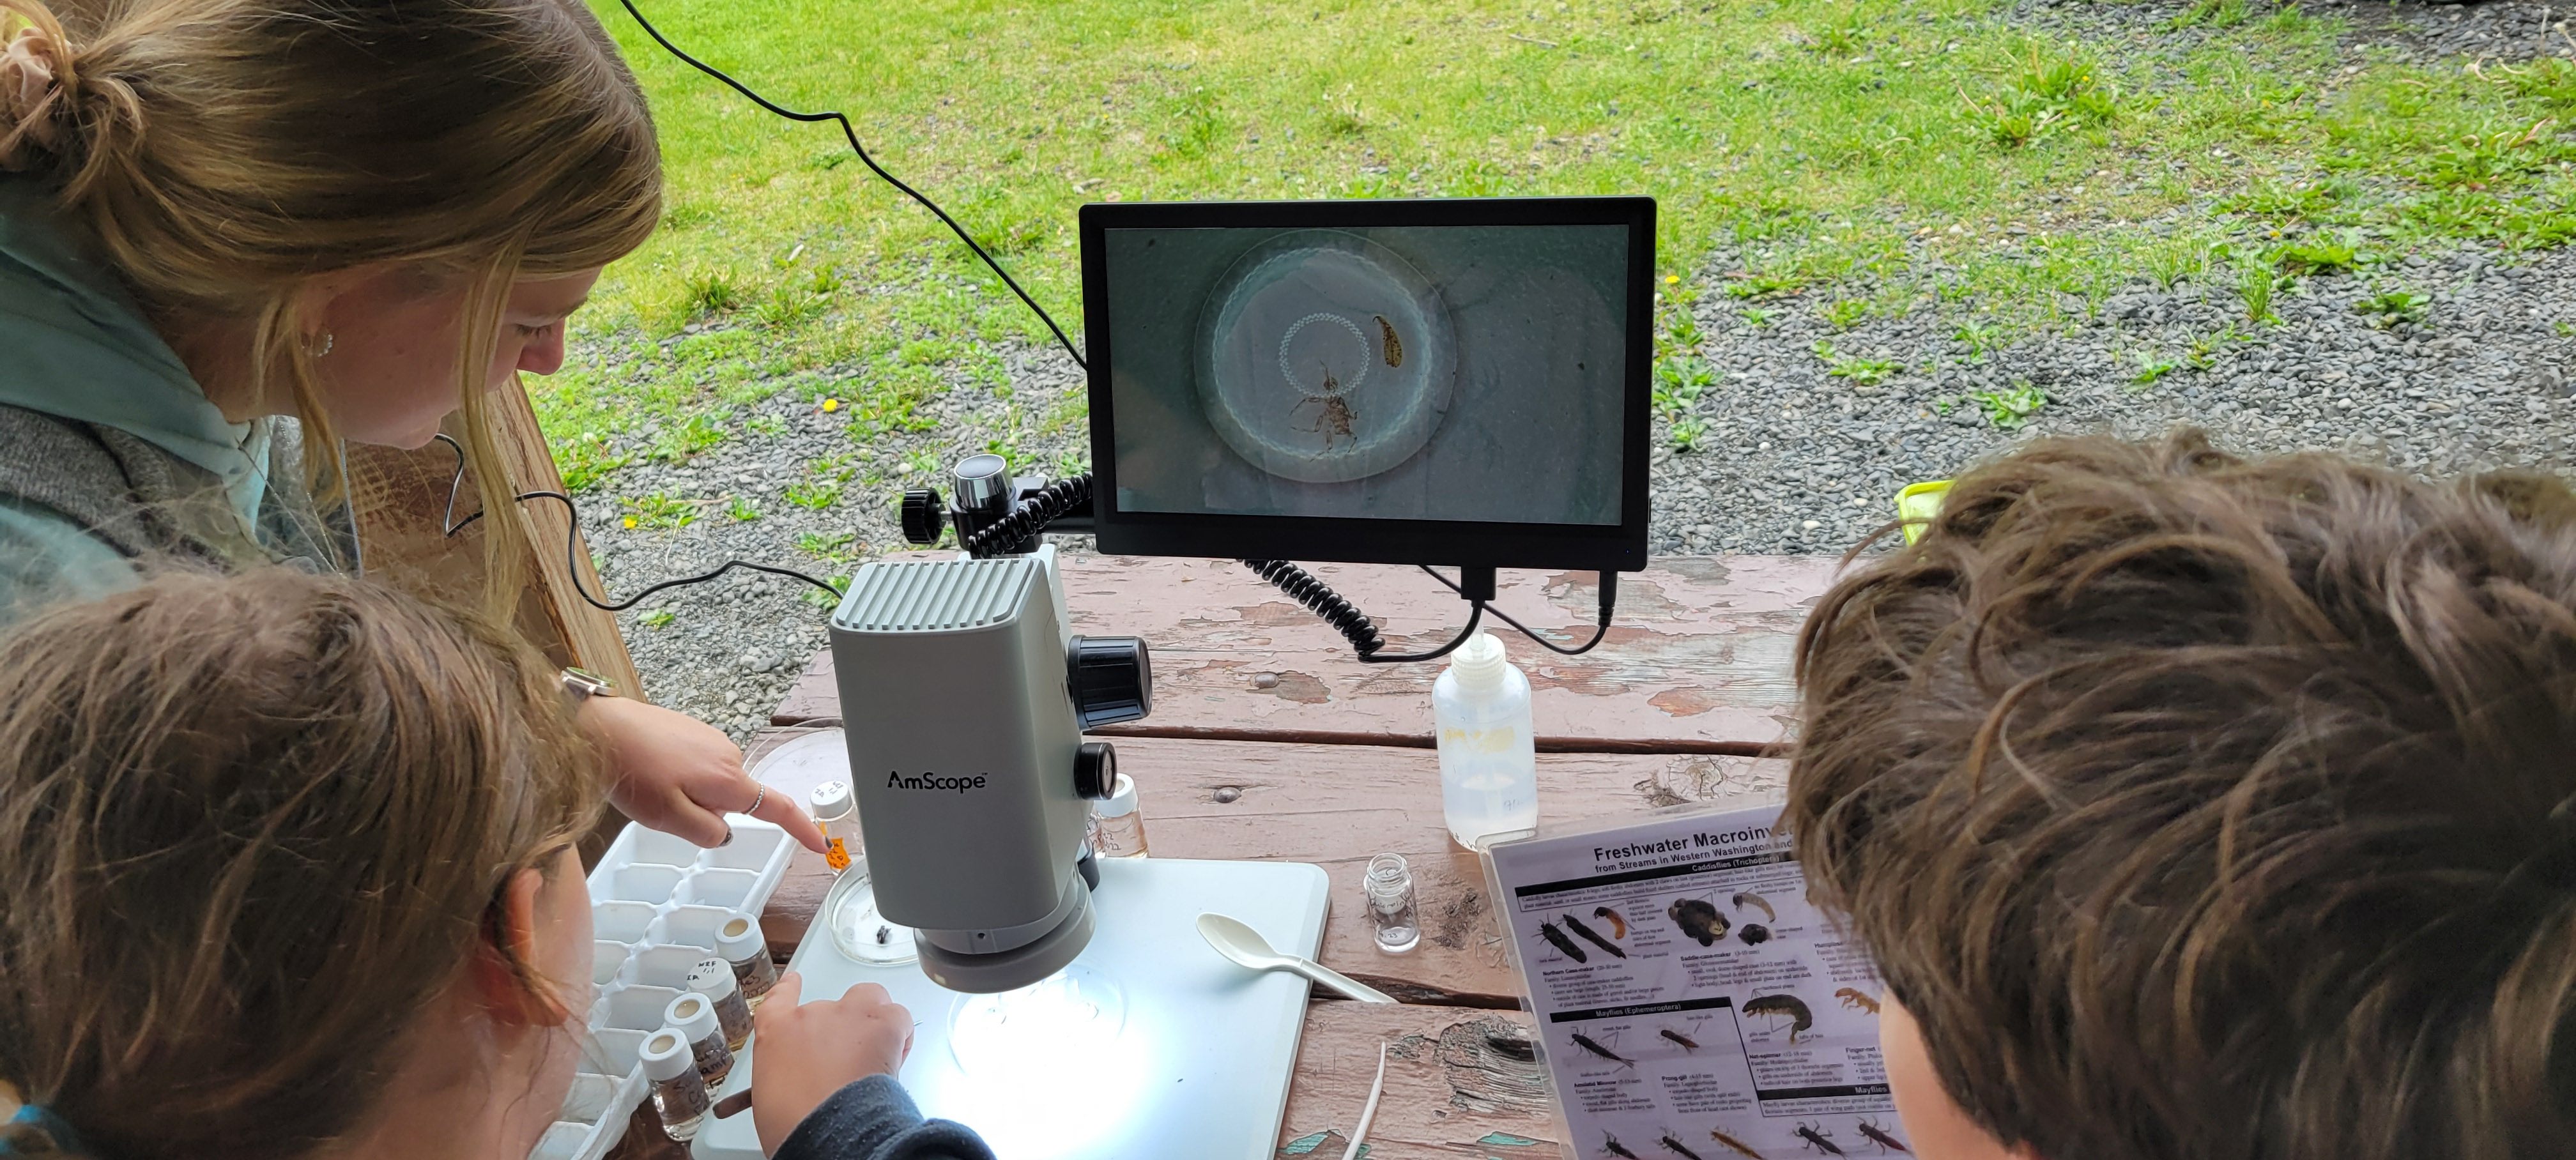 Two young students and their mentor, an intern, identify bugs using a microscope.